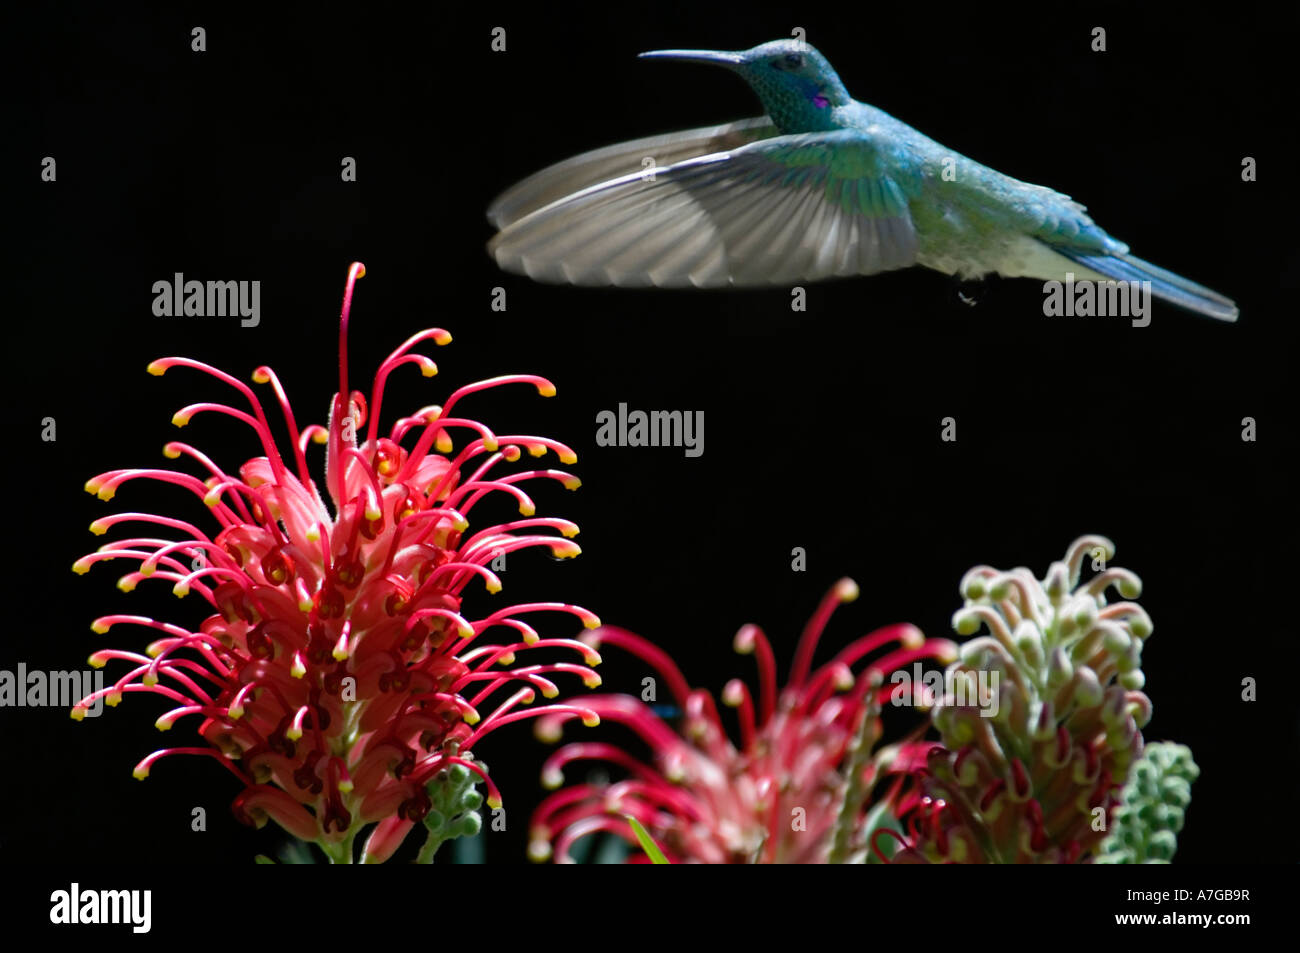 A Singing Hummingbird (Colibri Serrirostris) in flight about to take nectar from a Kahili flower (Grevillea Banksii). Stock Photo